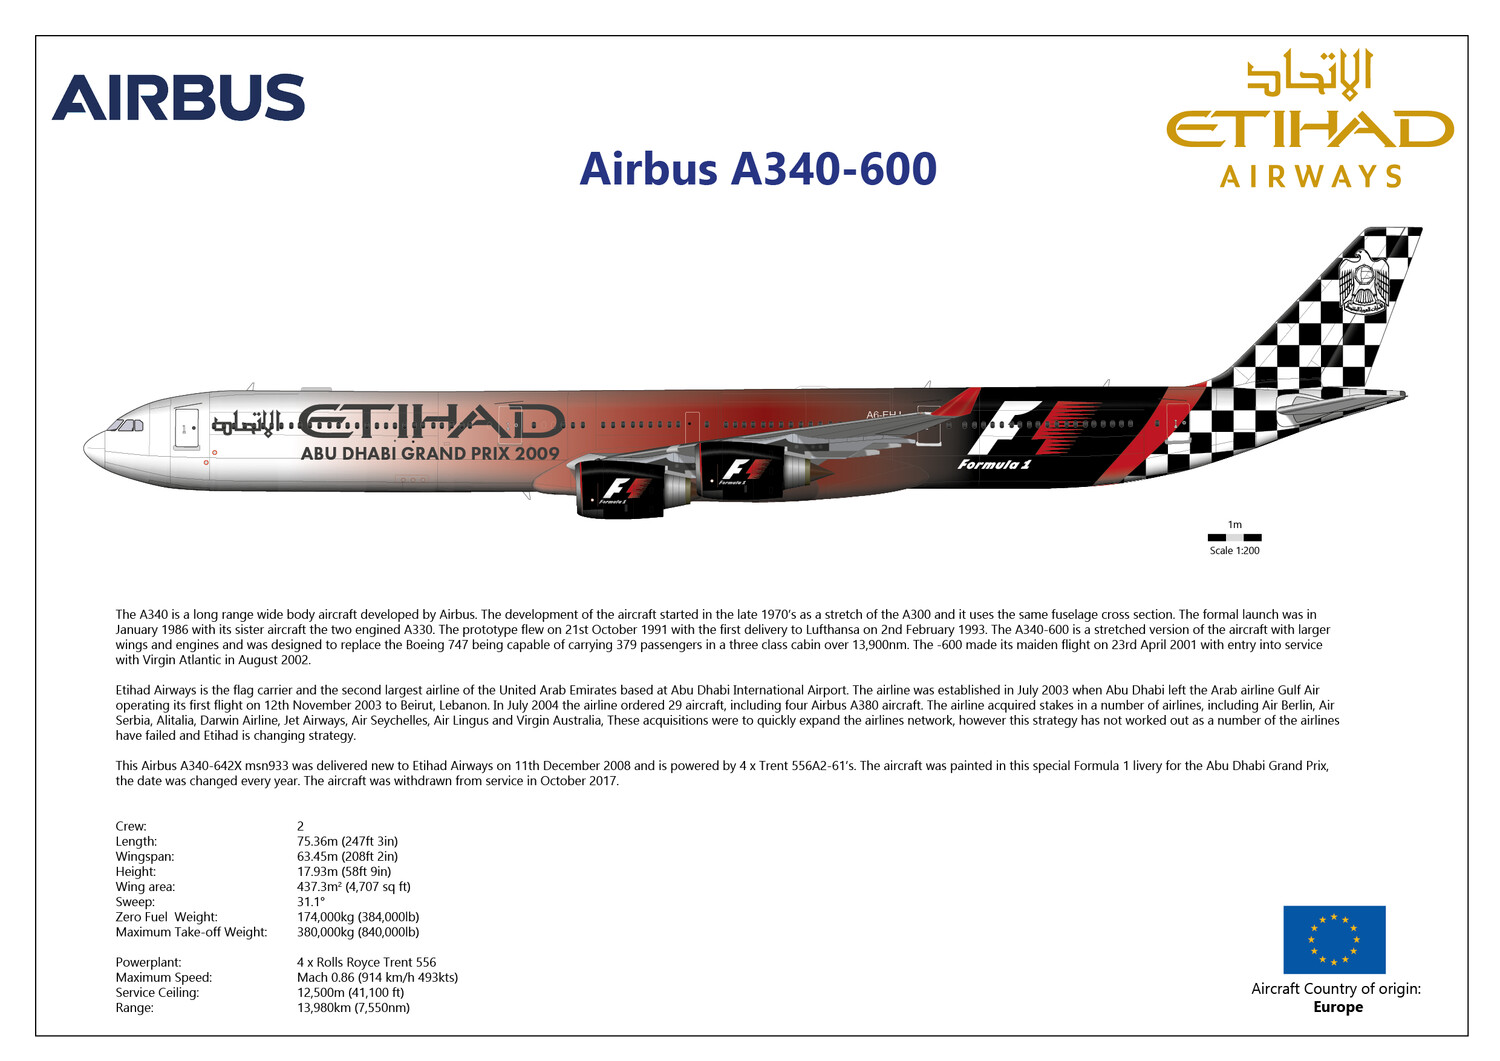 Airbus A340-600 of Etihad Airlines in F1 Livery - Layout B